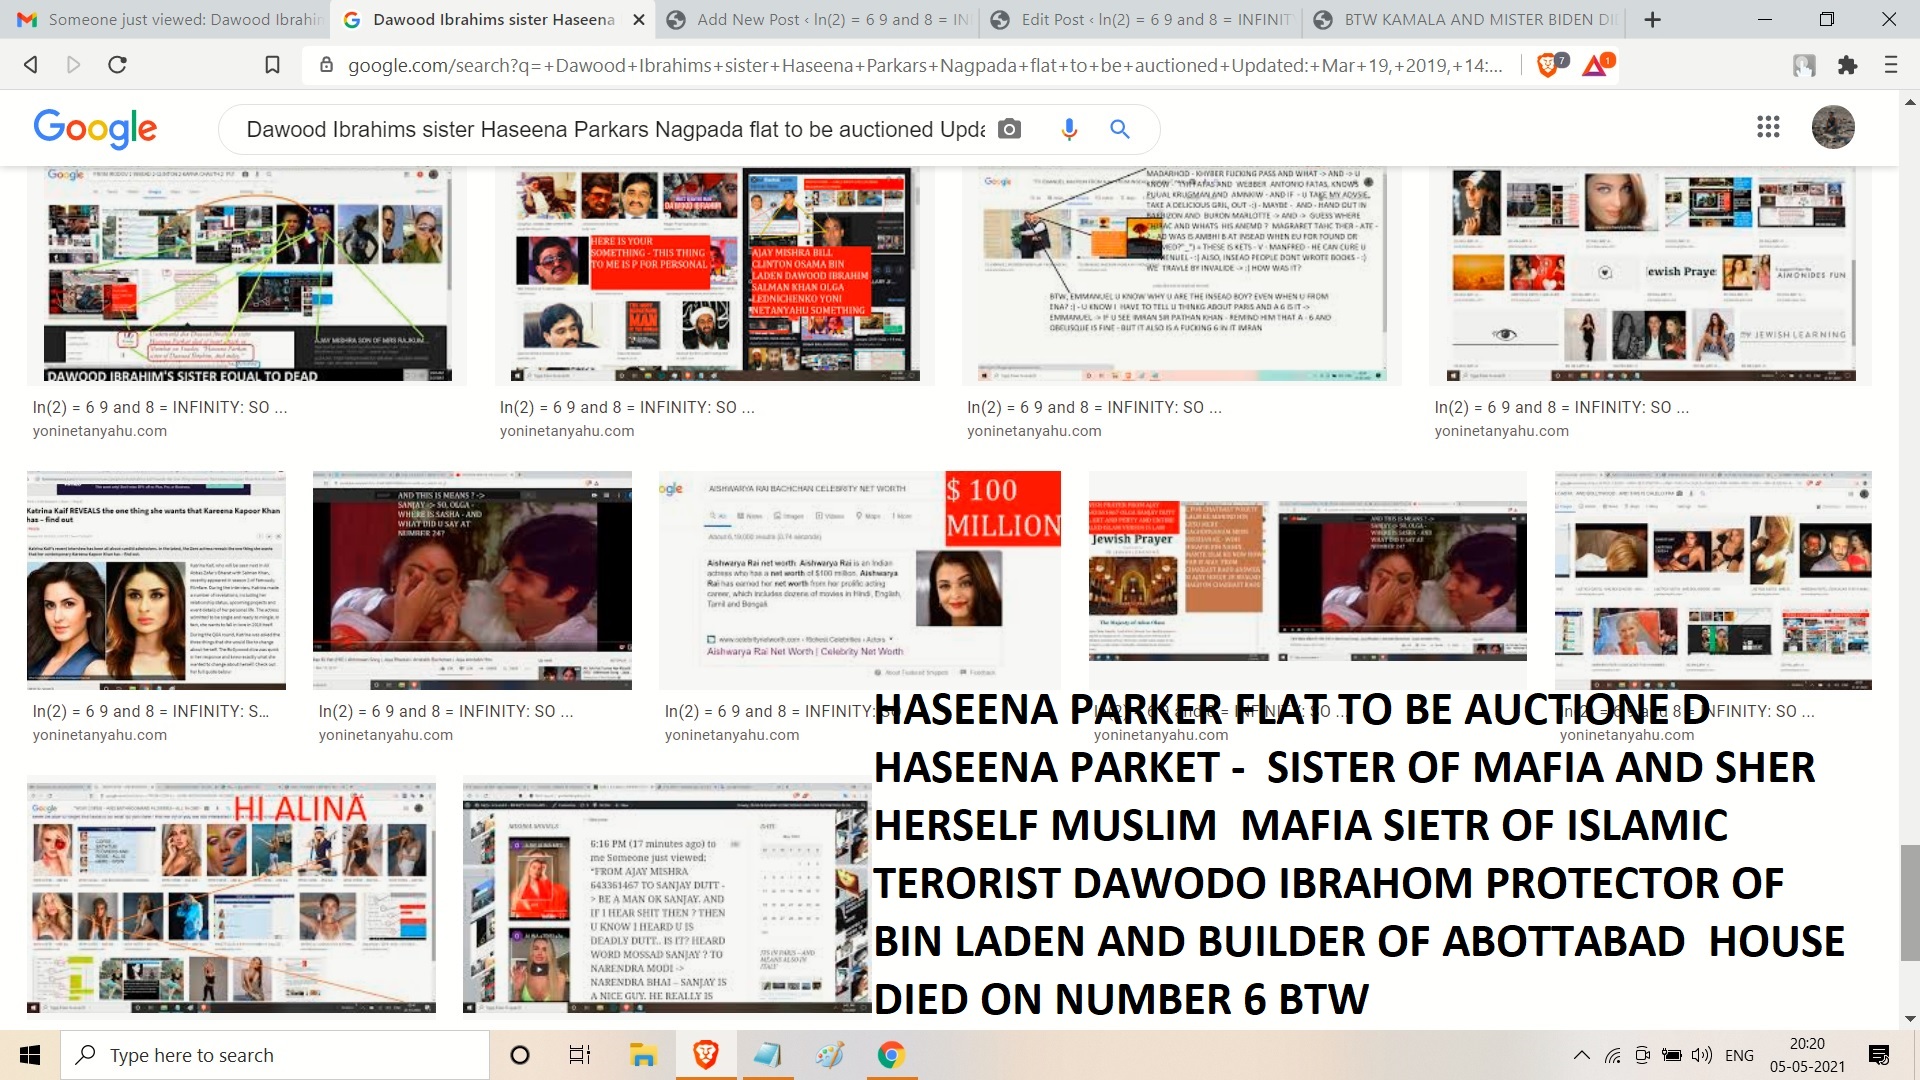 HASEENA PARKER FLAT TO BE AUCTIONE D HASEENA PARKET - SISTER OF MAFIA AND SEH EHRSEFL MAFOA DIED ON NUMBER 6 BTW